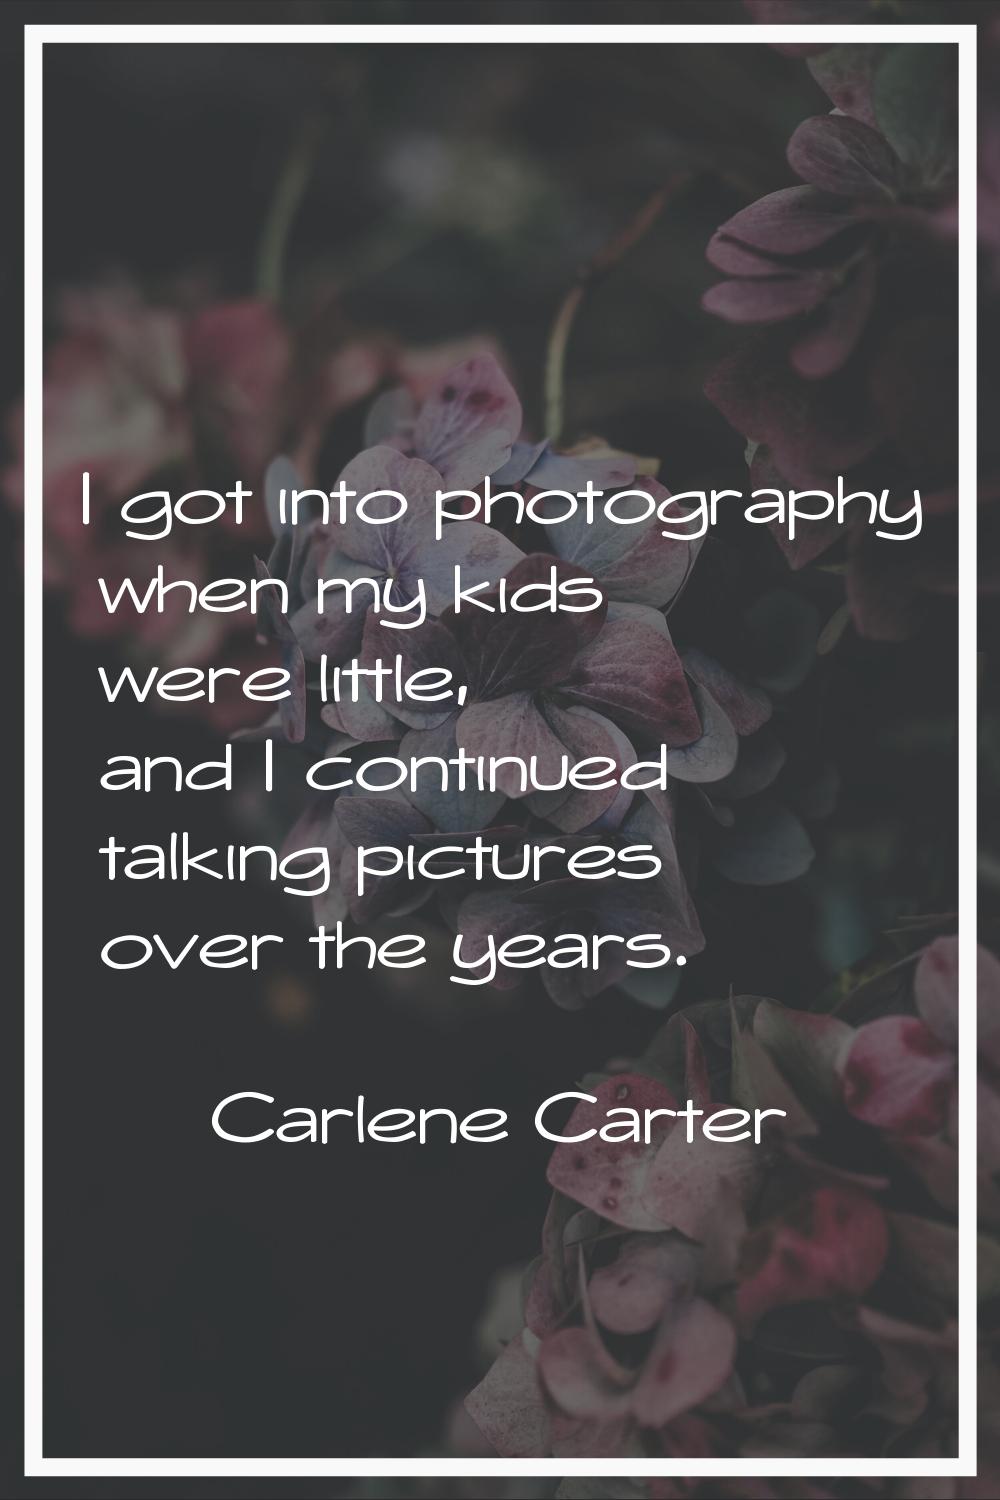 I got into photography when my kids were little, and I continued talking pictures over the years.